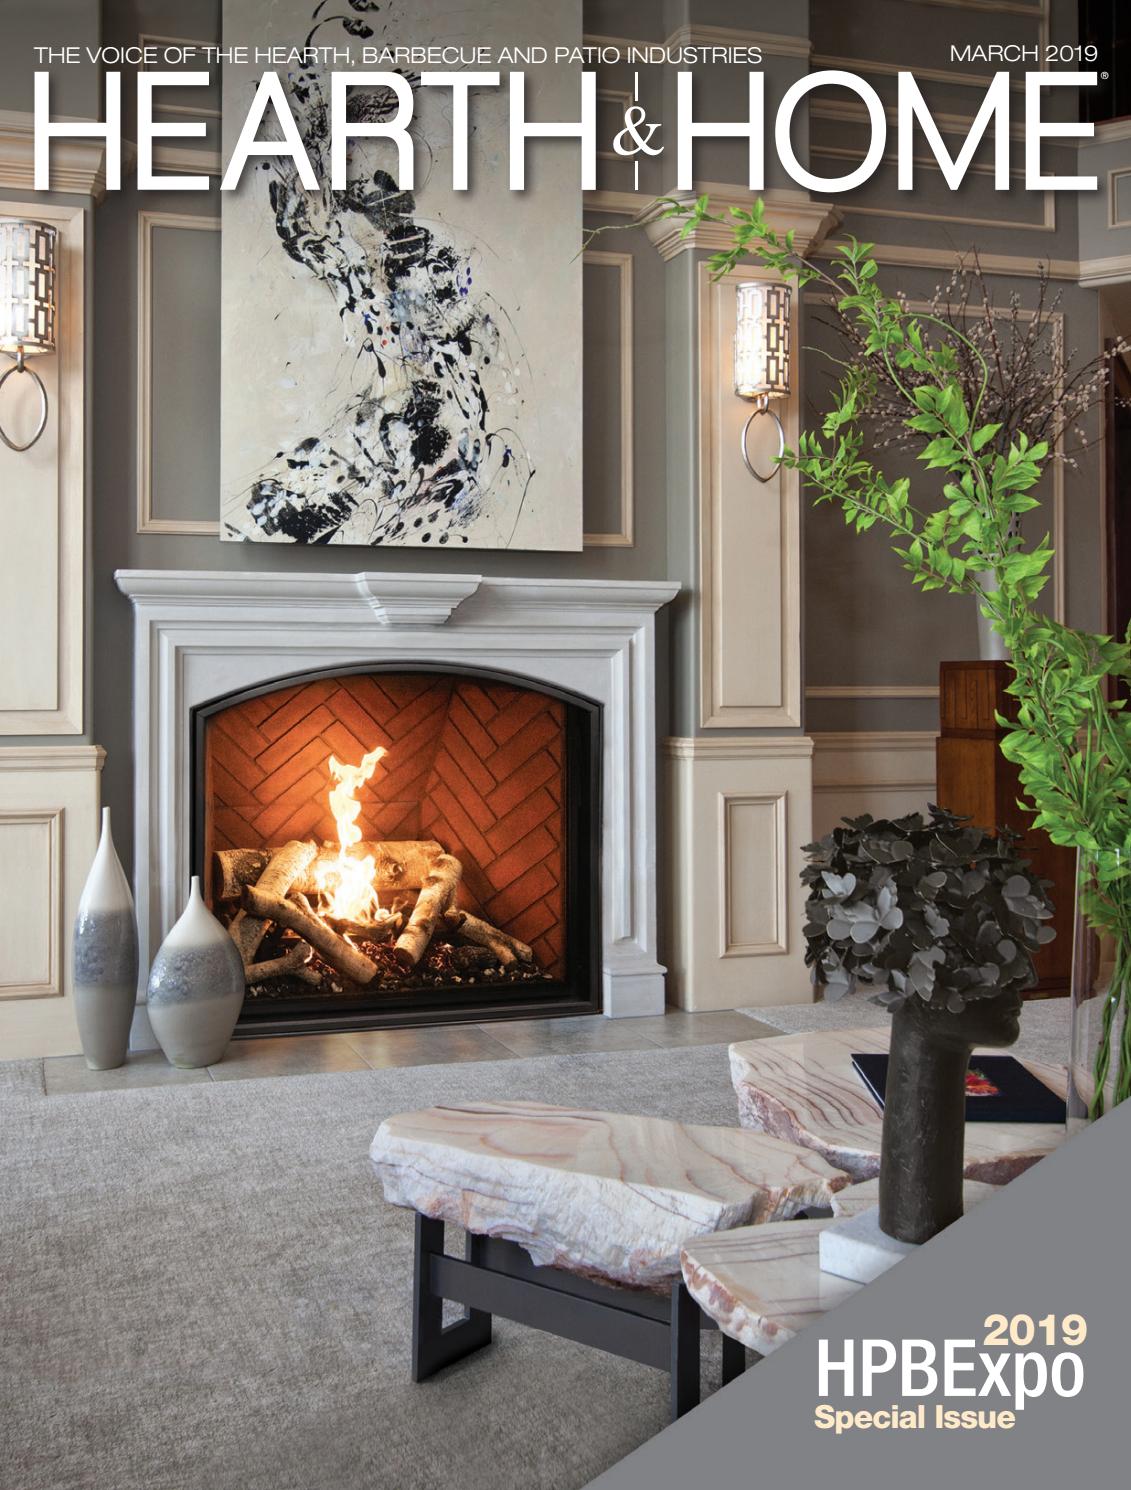 Wayfair Electric Fireplace Insert Lovely Hearth & Home Magazine – 2019 March issue by Hearth & Home